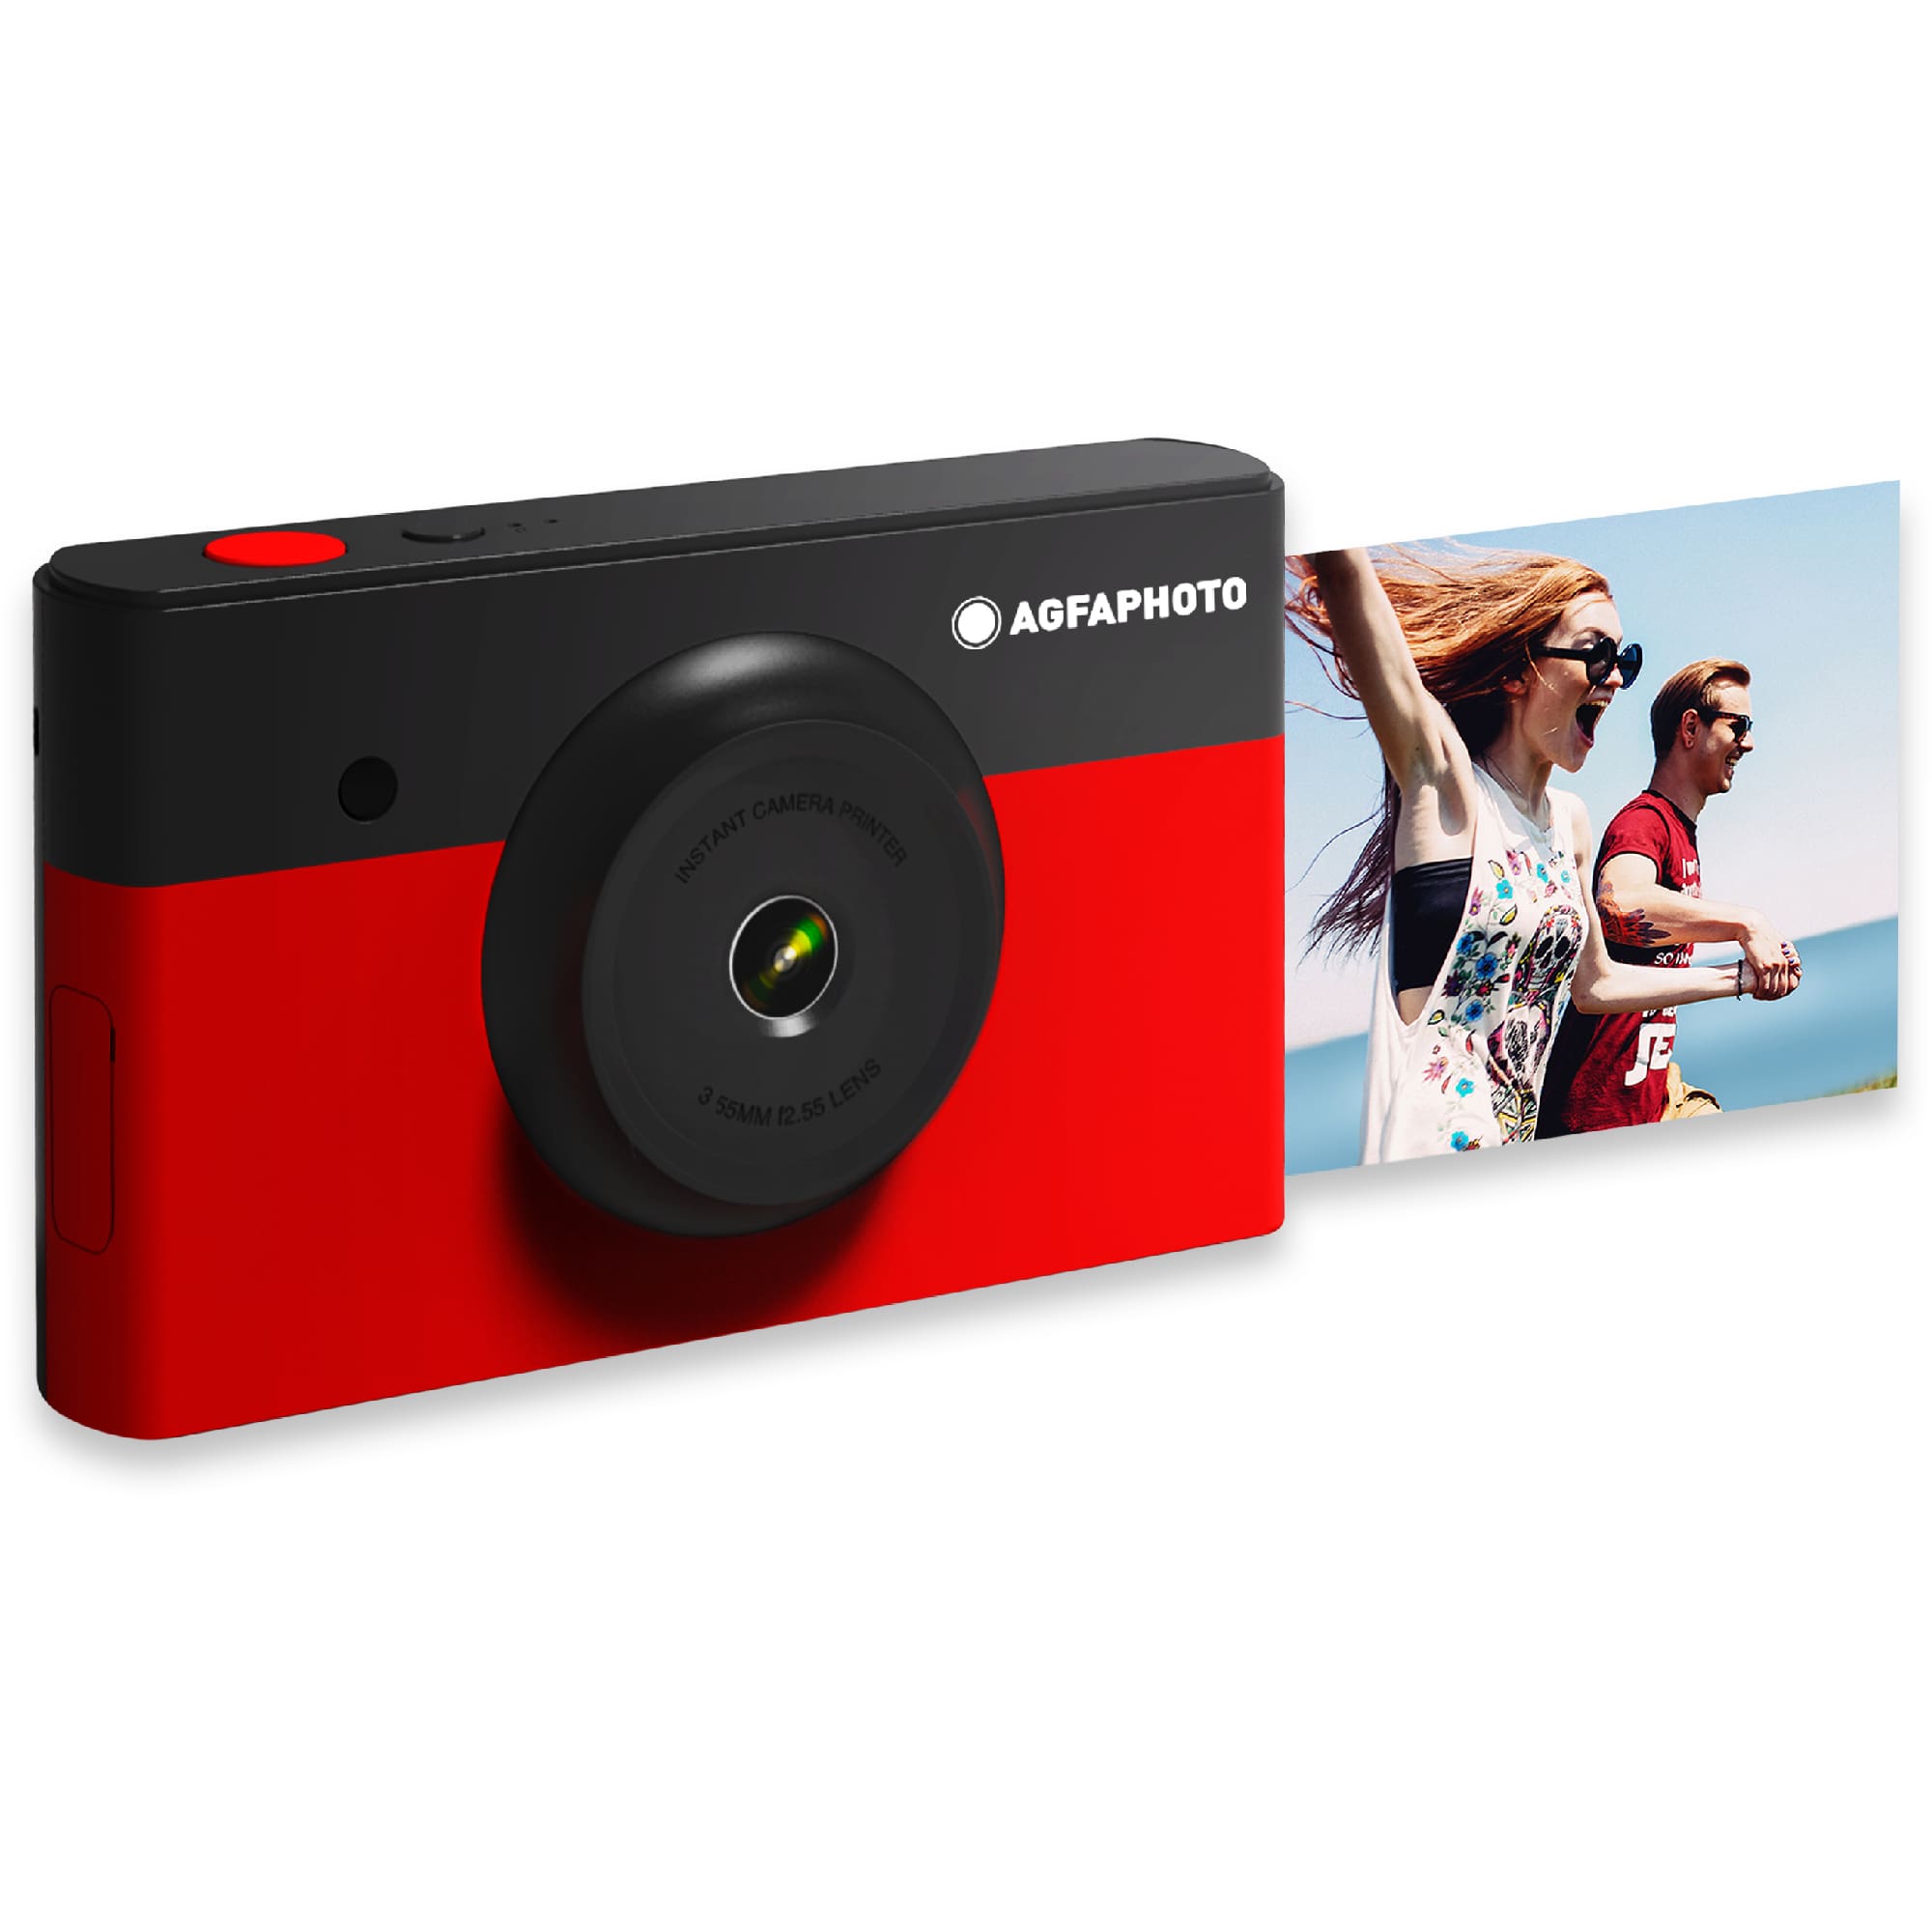 AgfaPhoto Realipix Mini S 10MP Instant Print Digital Photo Camera red and black front view